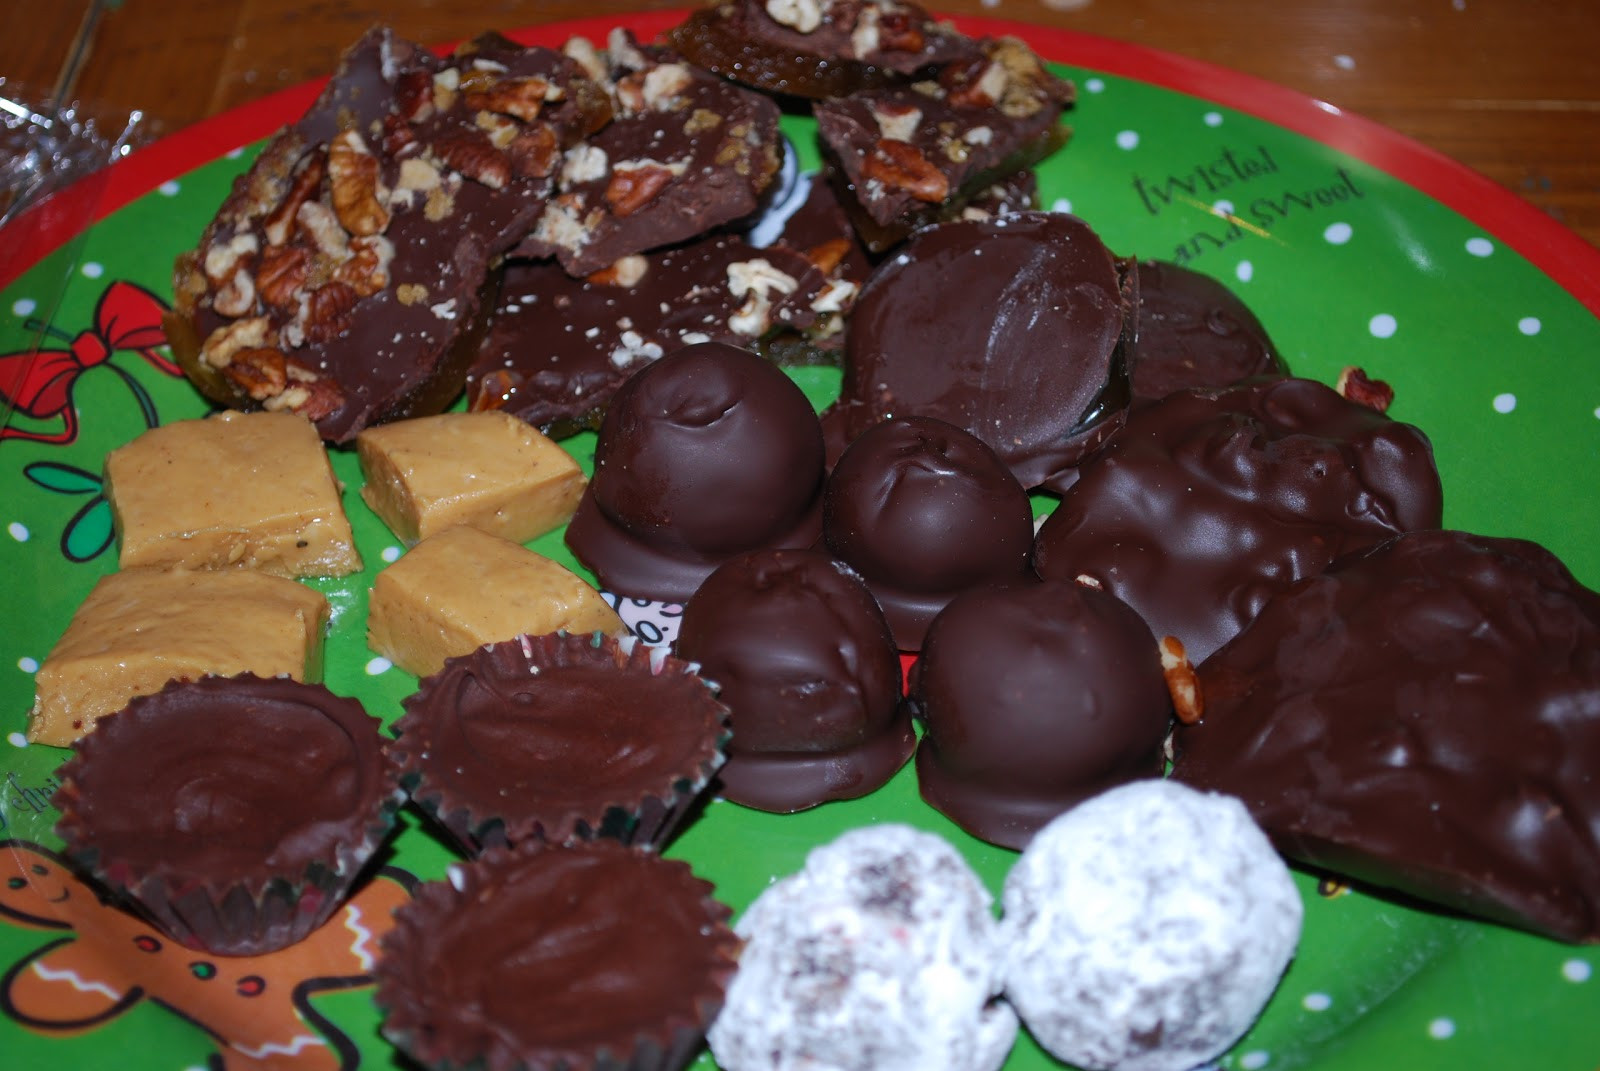 Vegan Candy Recipes
 The Peaceful Kitchen Delicious Vegan Christmas Candy Recipes